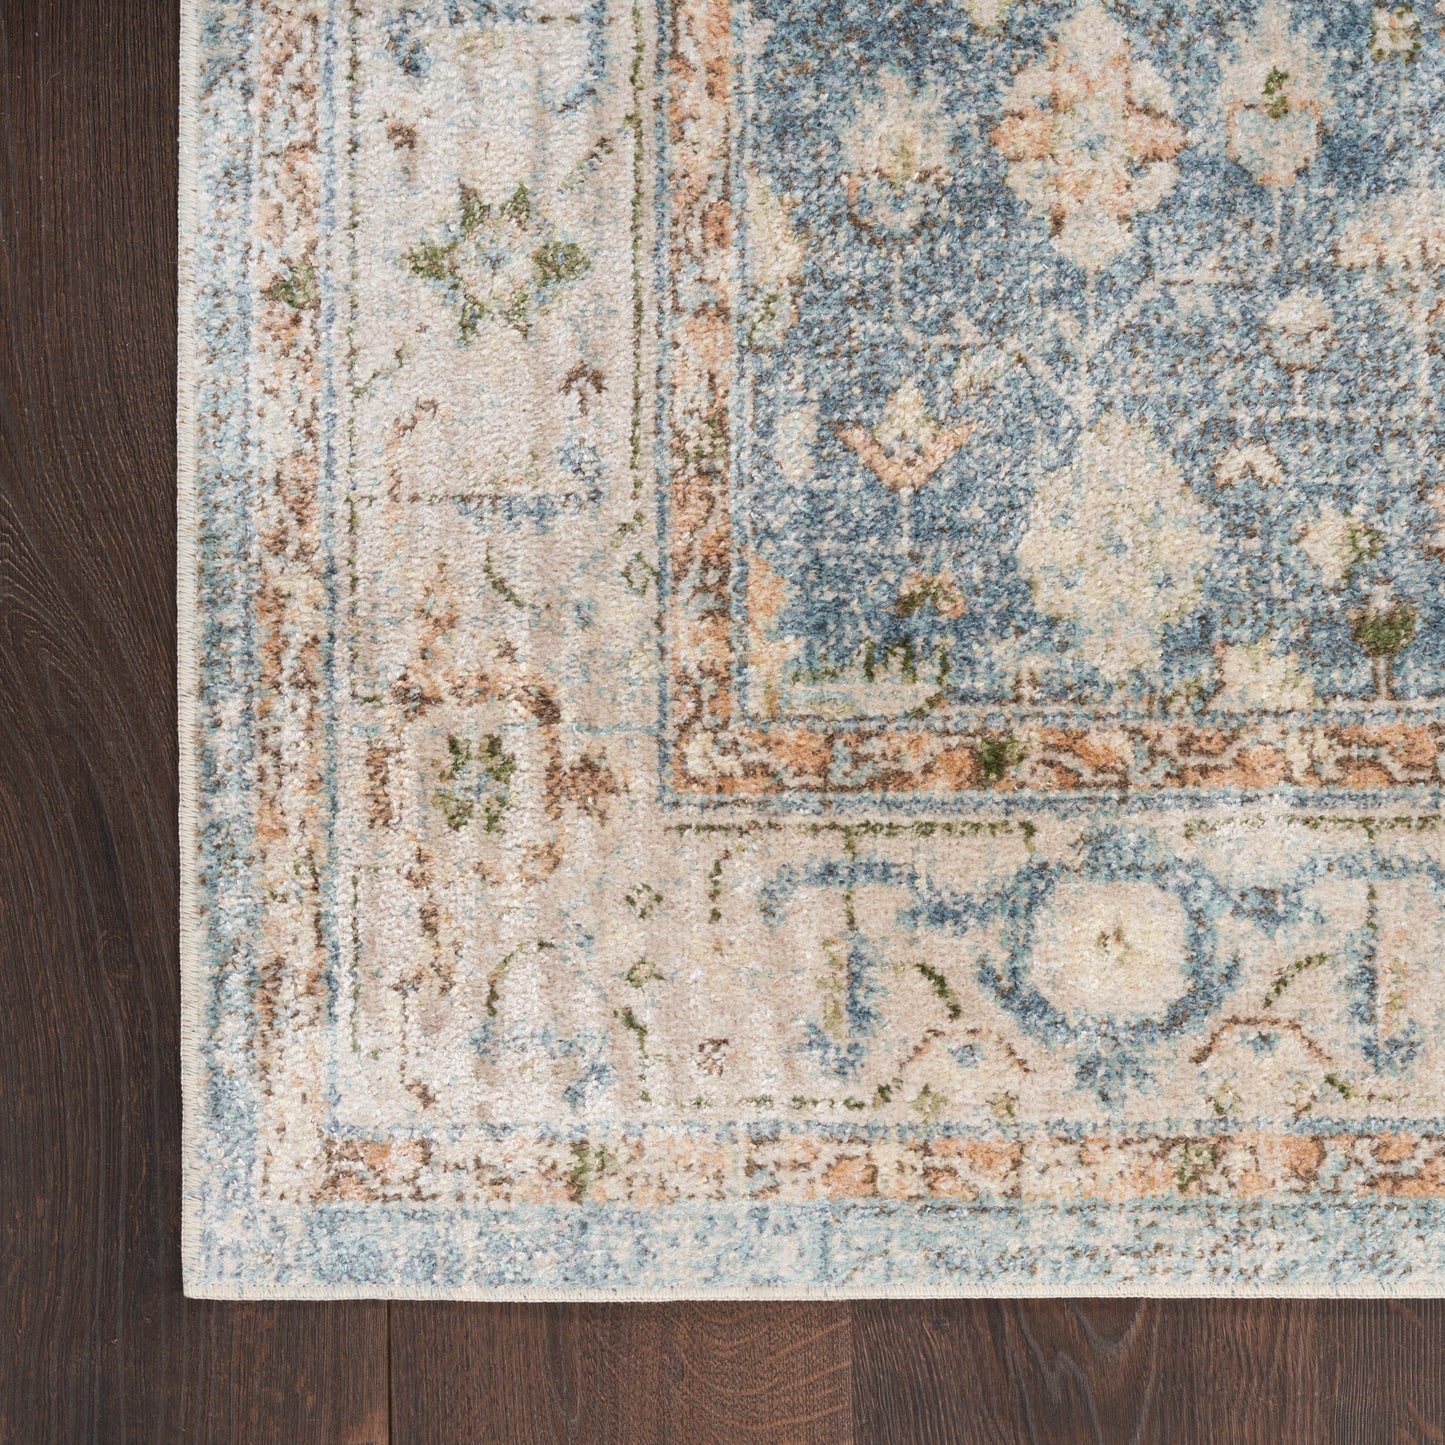 Nourison Home Astra Machine Washable ASW11 Silver Blue Traditional Machinemade Rug